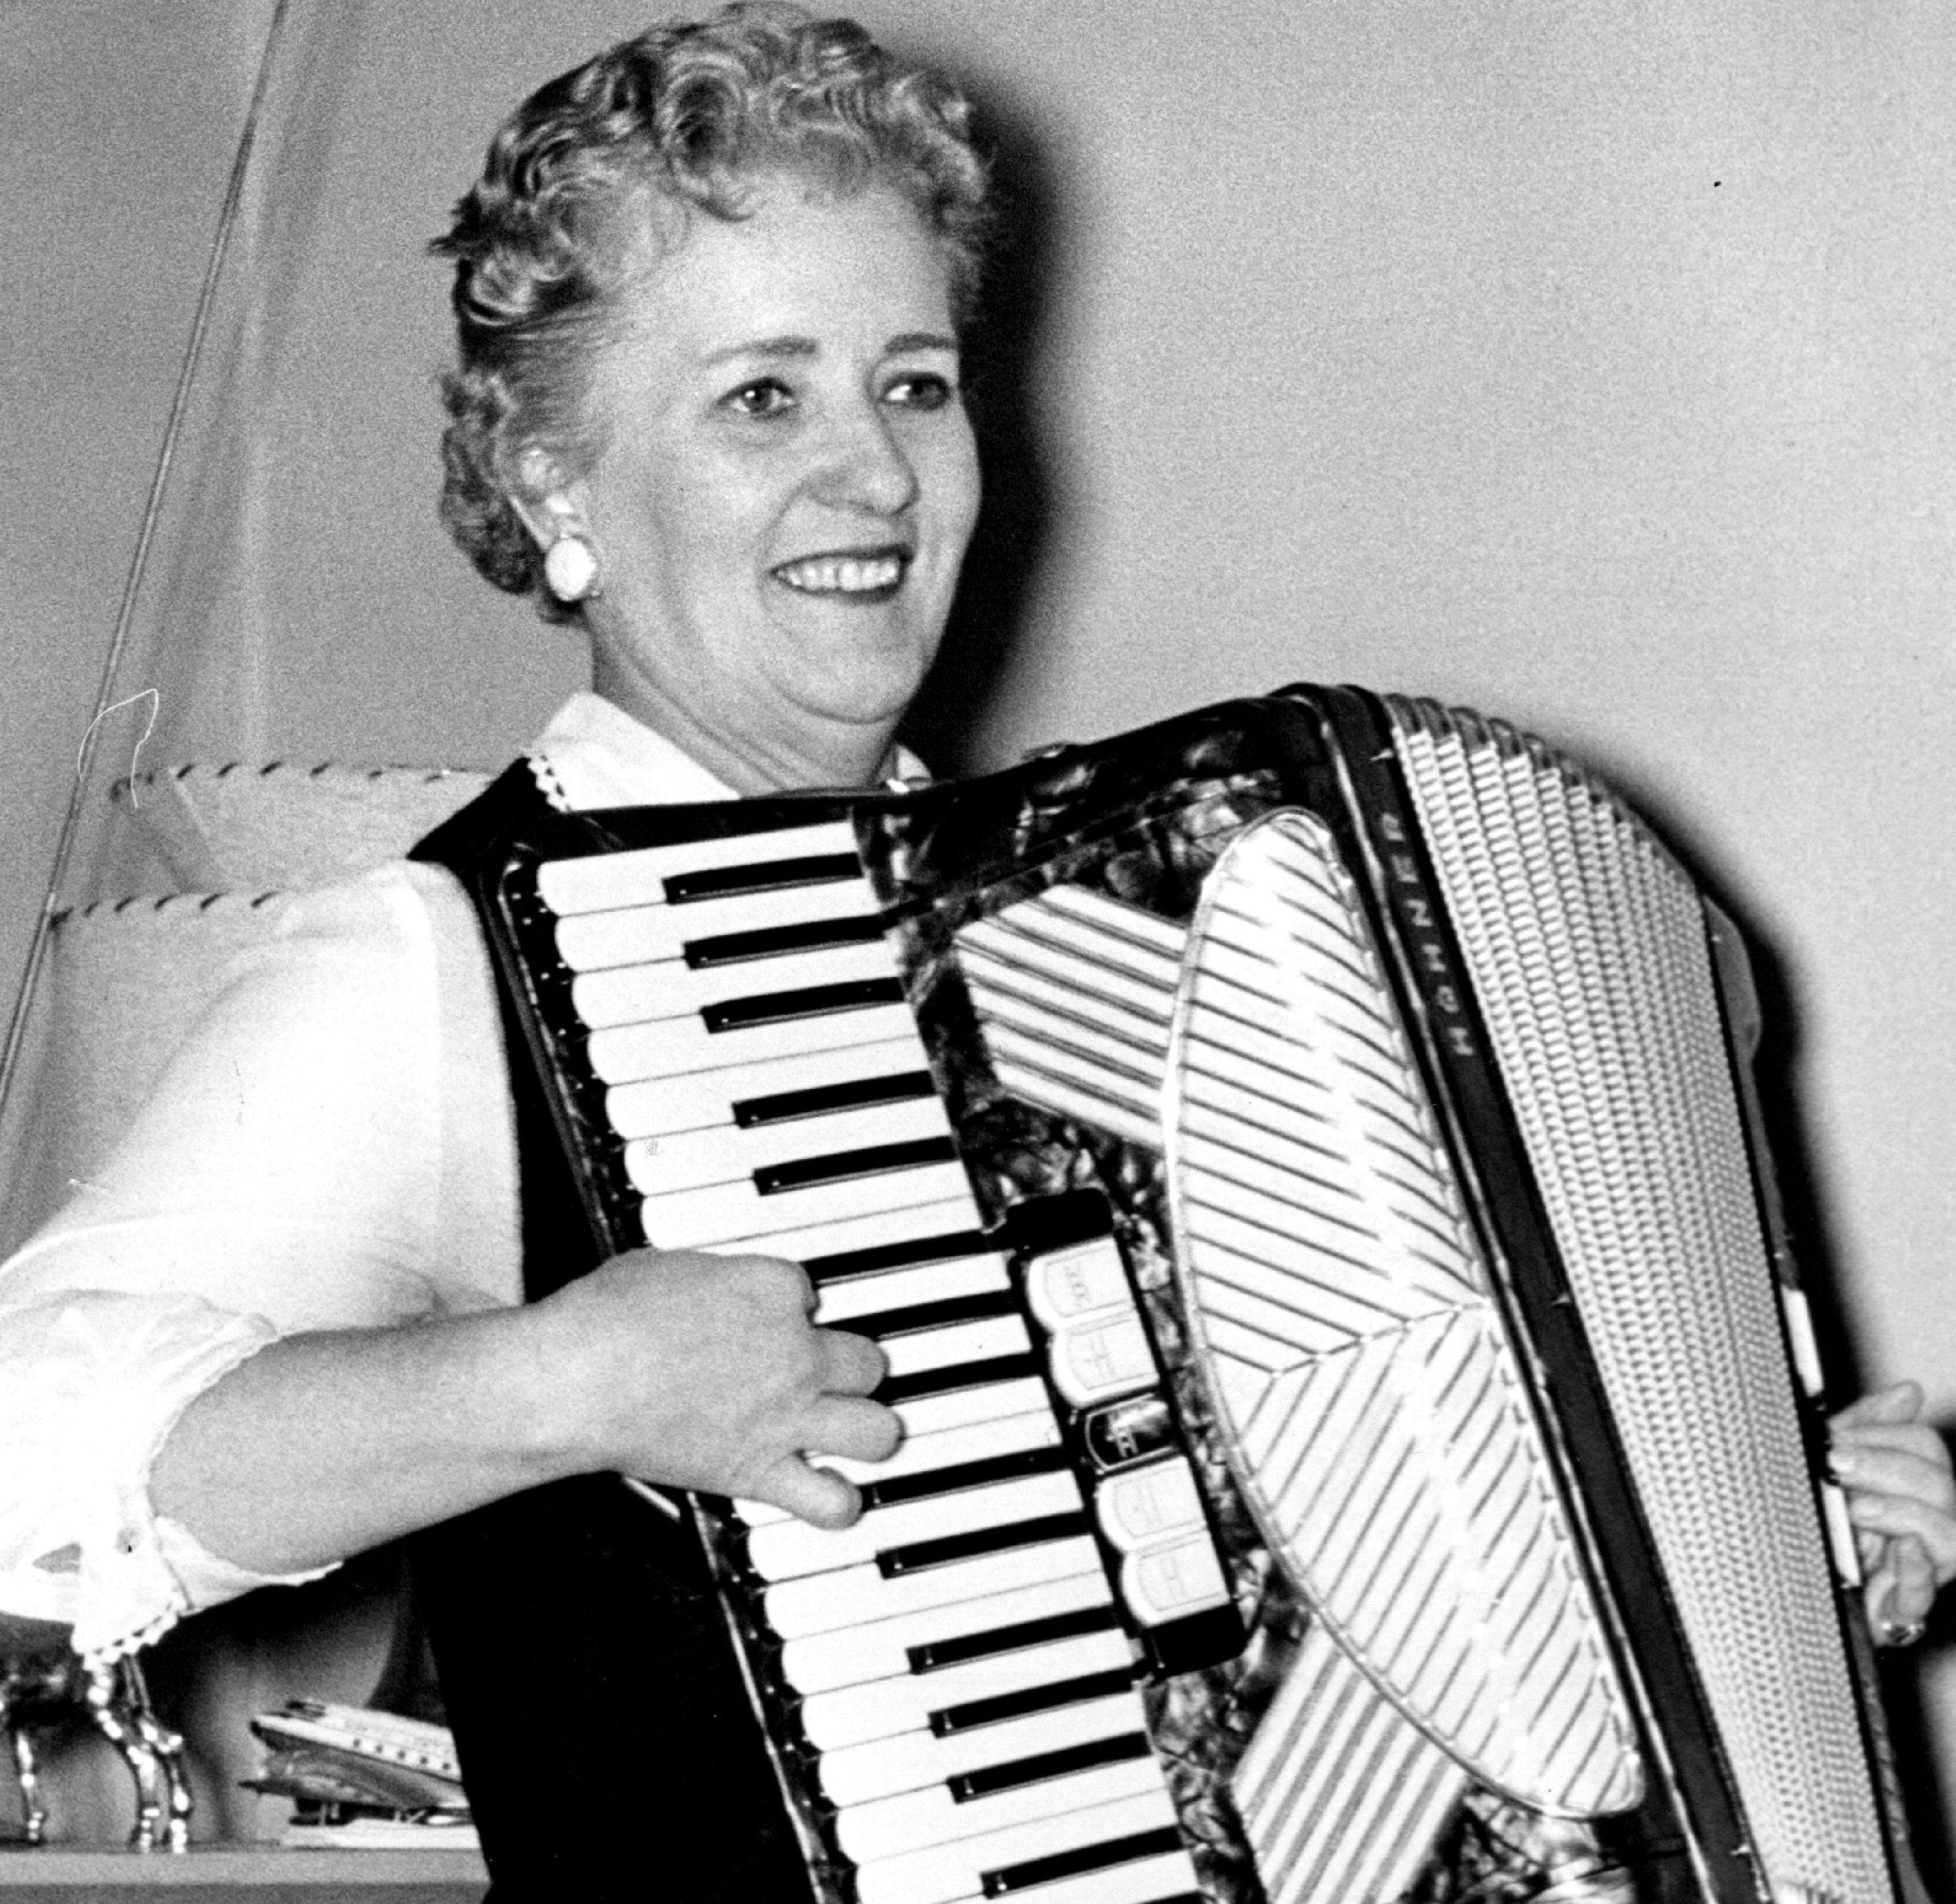 Coya Knutson, who studied English and music in school, played the accordian in 1958 while awaiting Minnesota primary results.